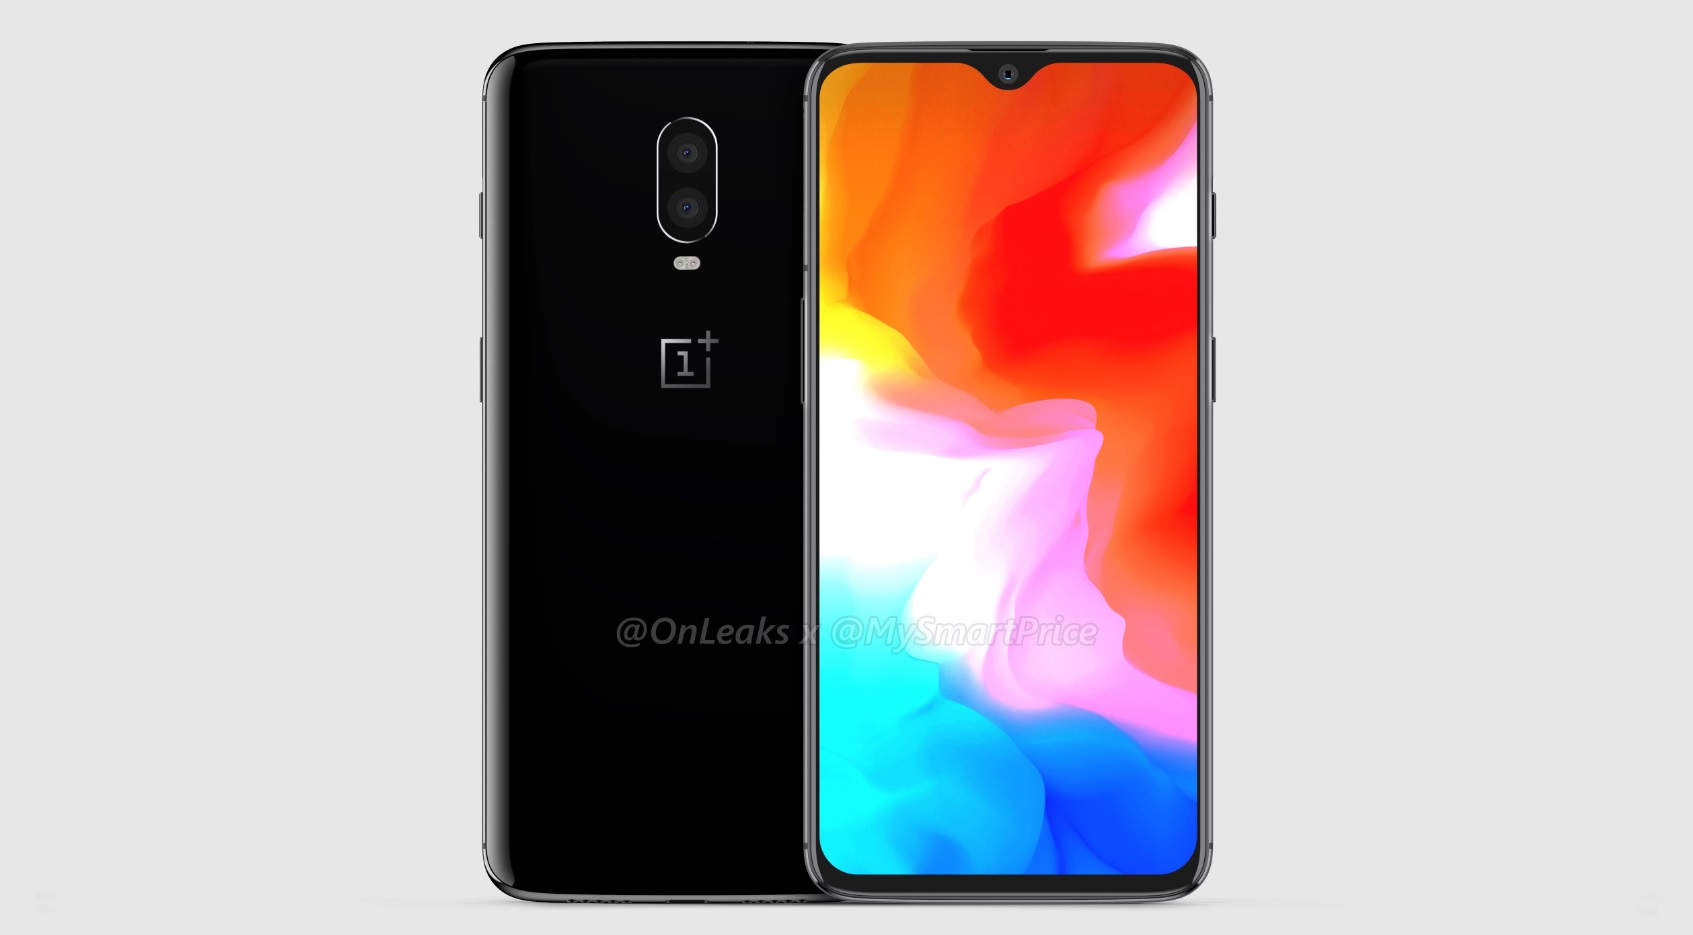 A leaked render of the OnePlus 6T.